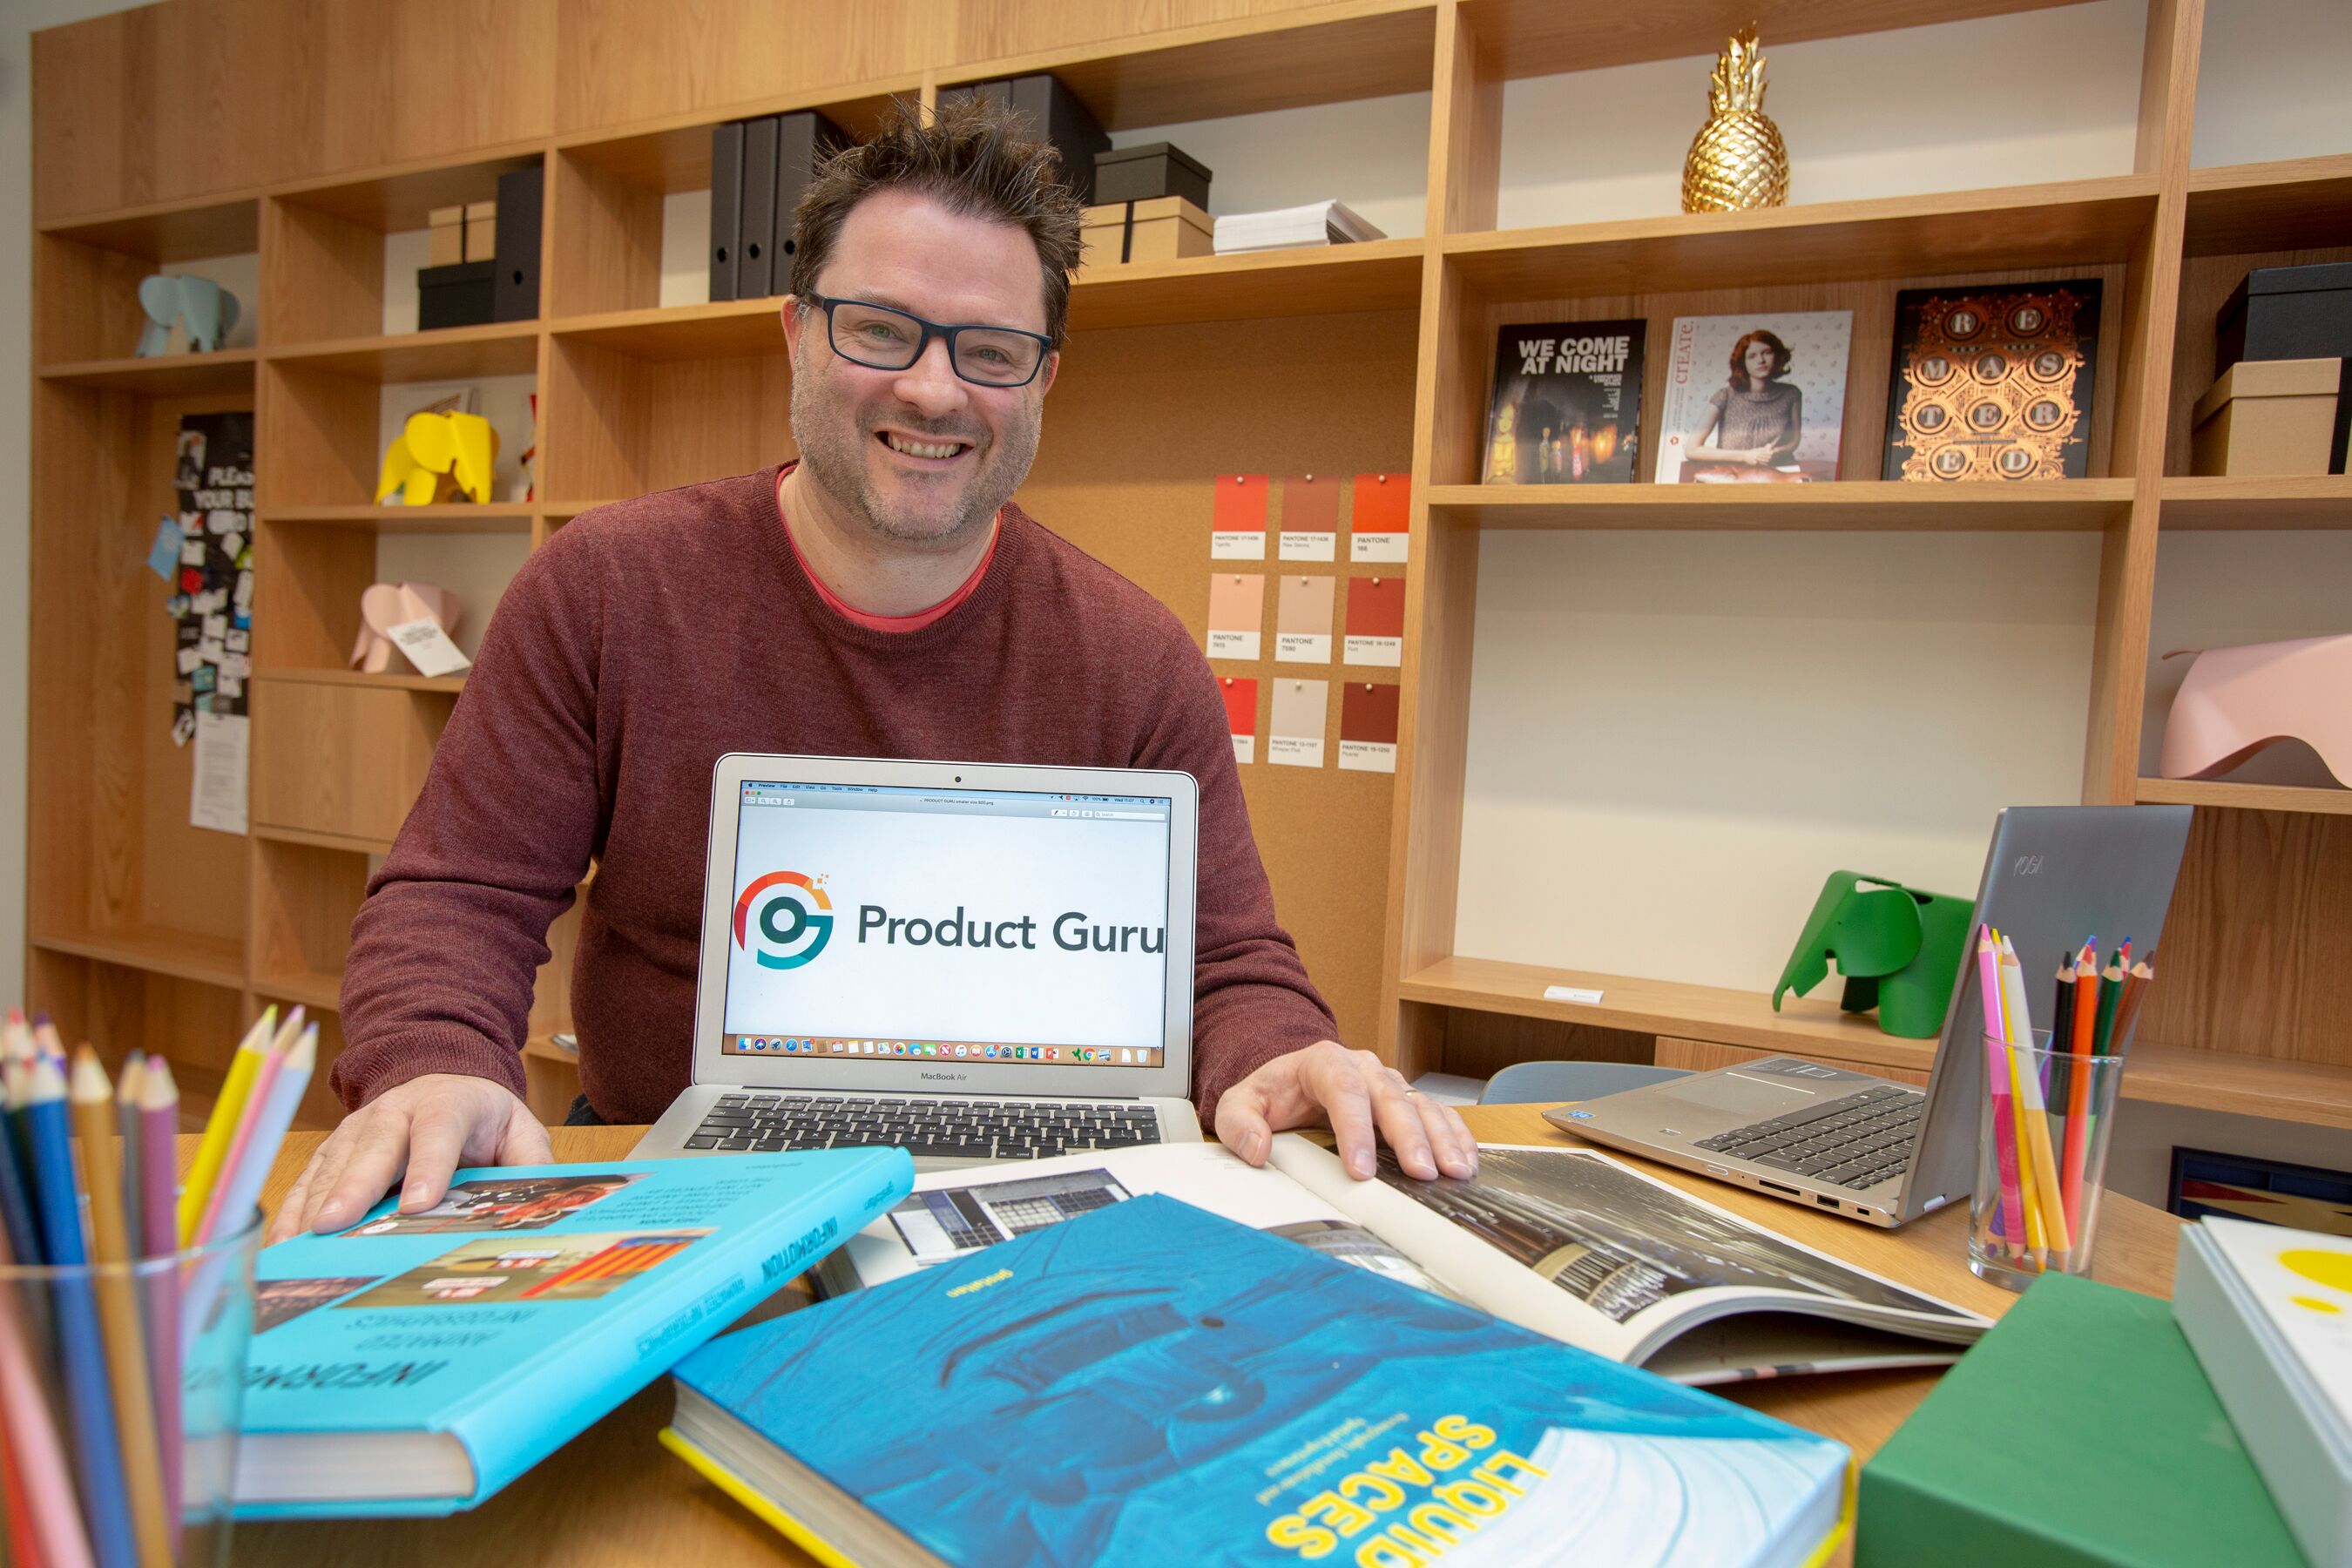 Product Guru’s ‘Tinder for retailers and suppliers’ platform raises £300,000